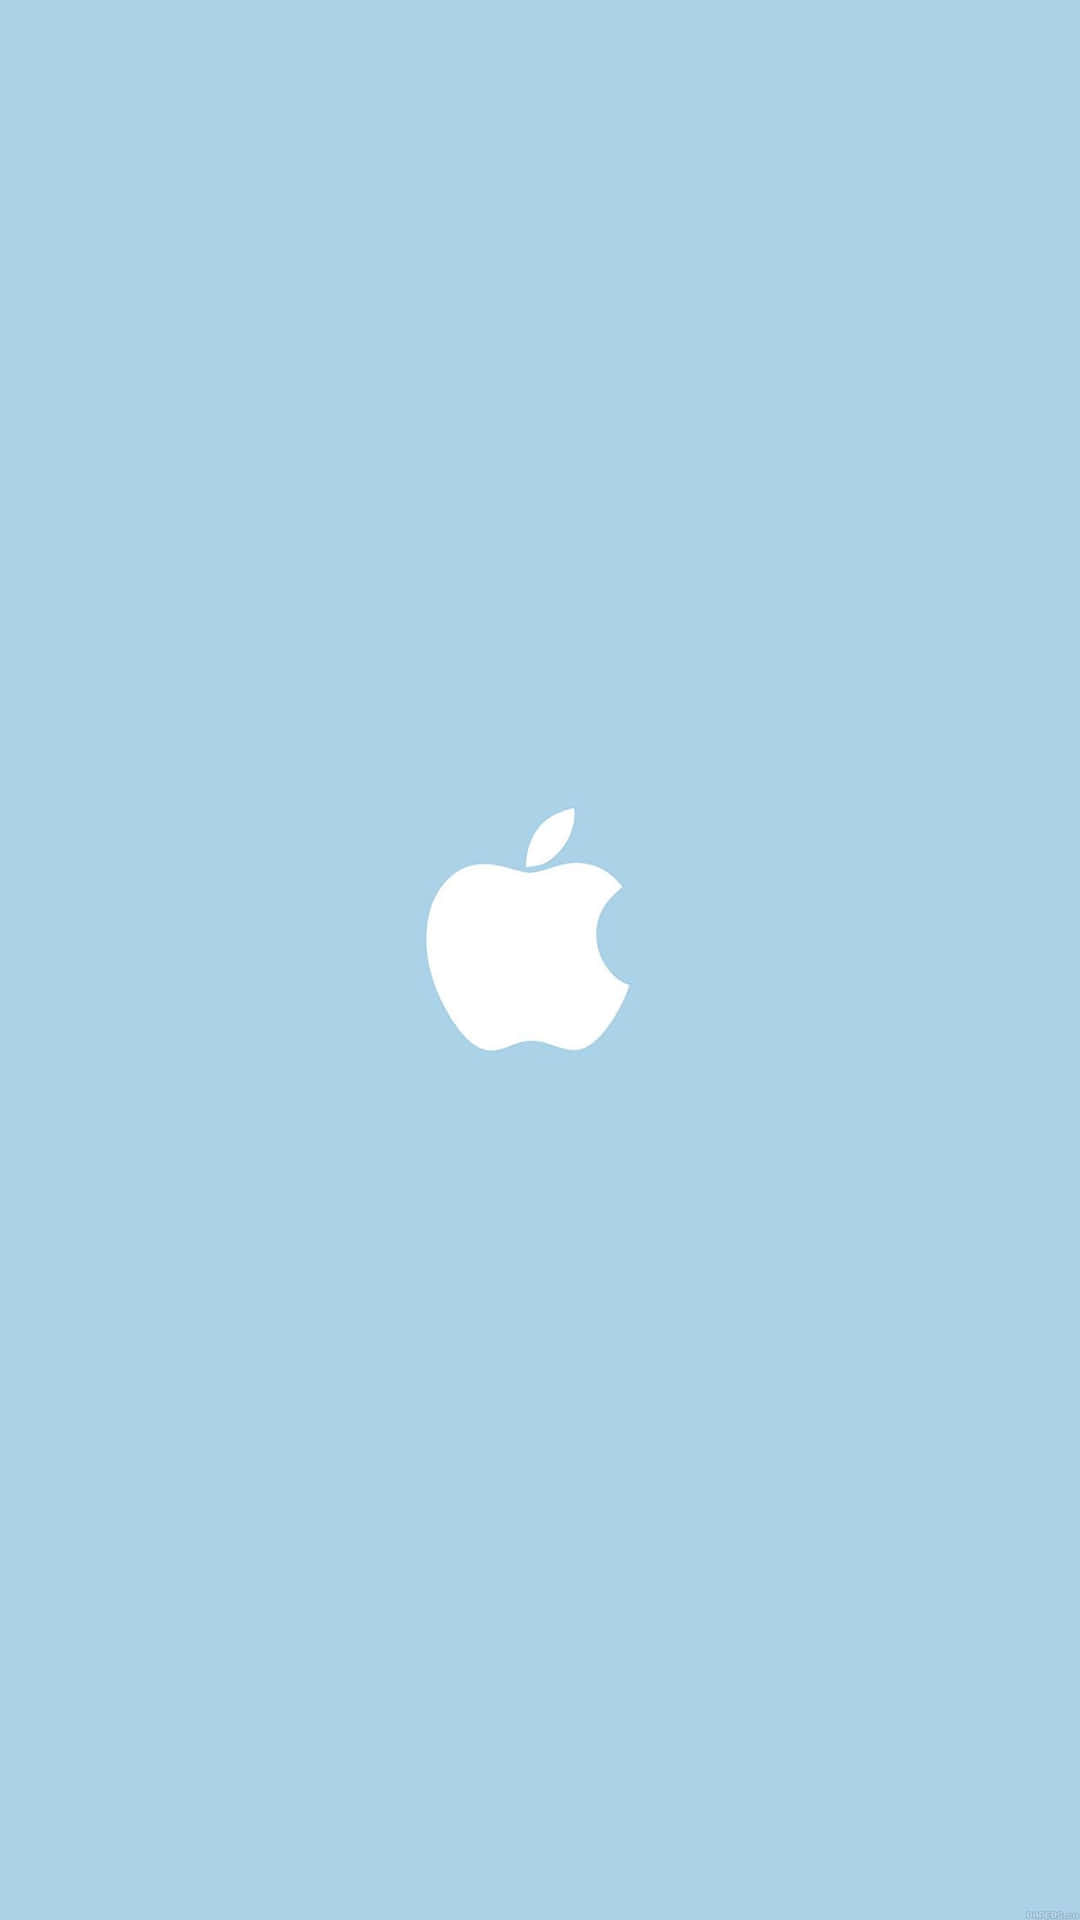 Get the latest Simple Blue Iphone. Wallpaper